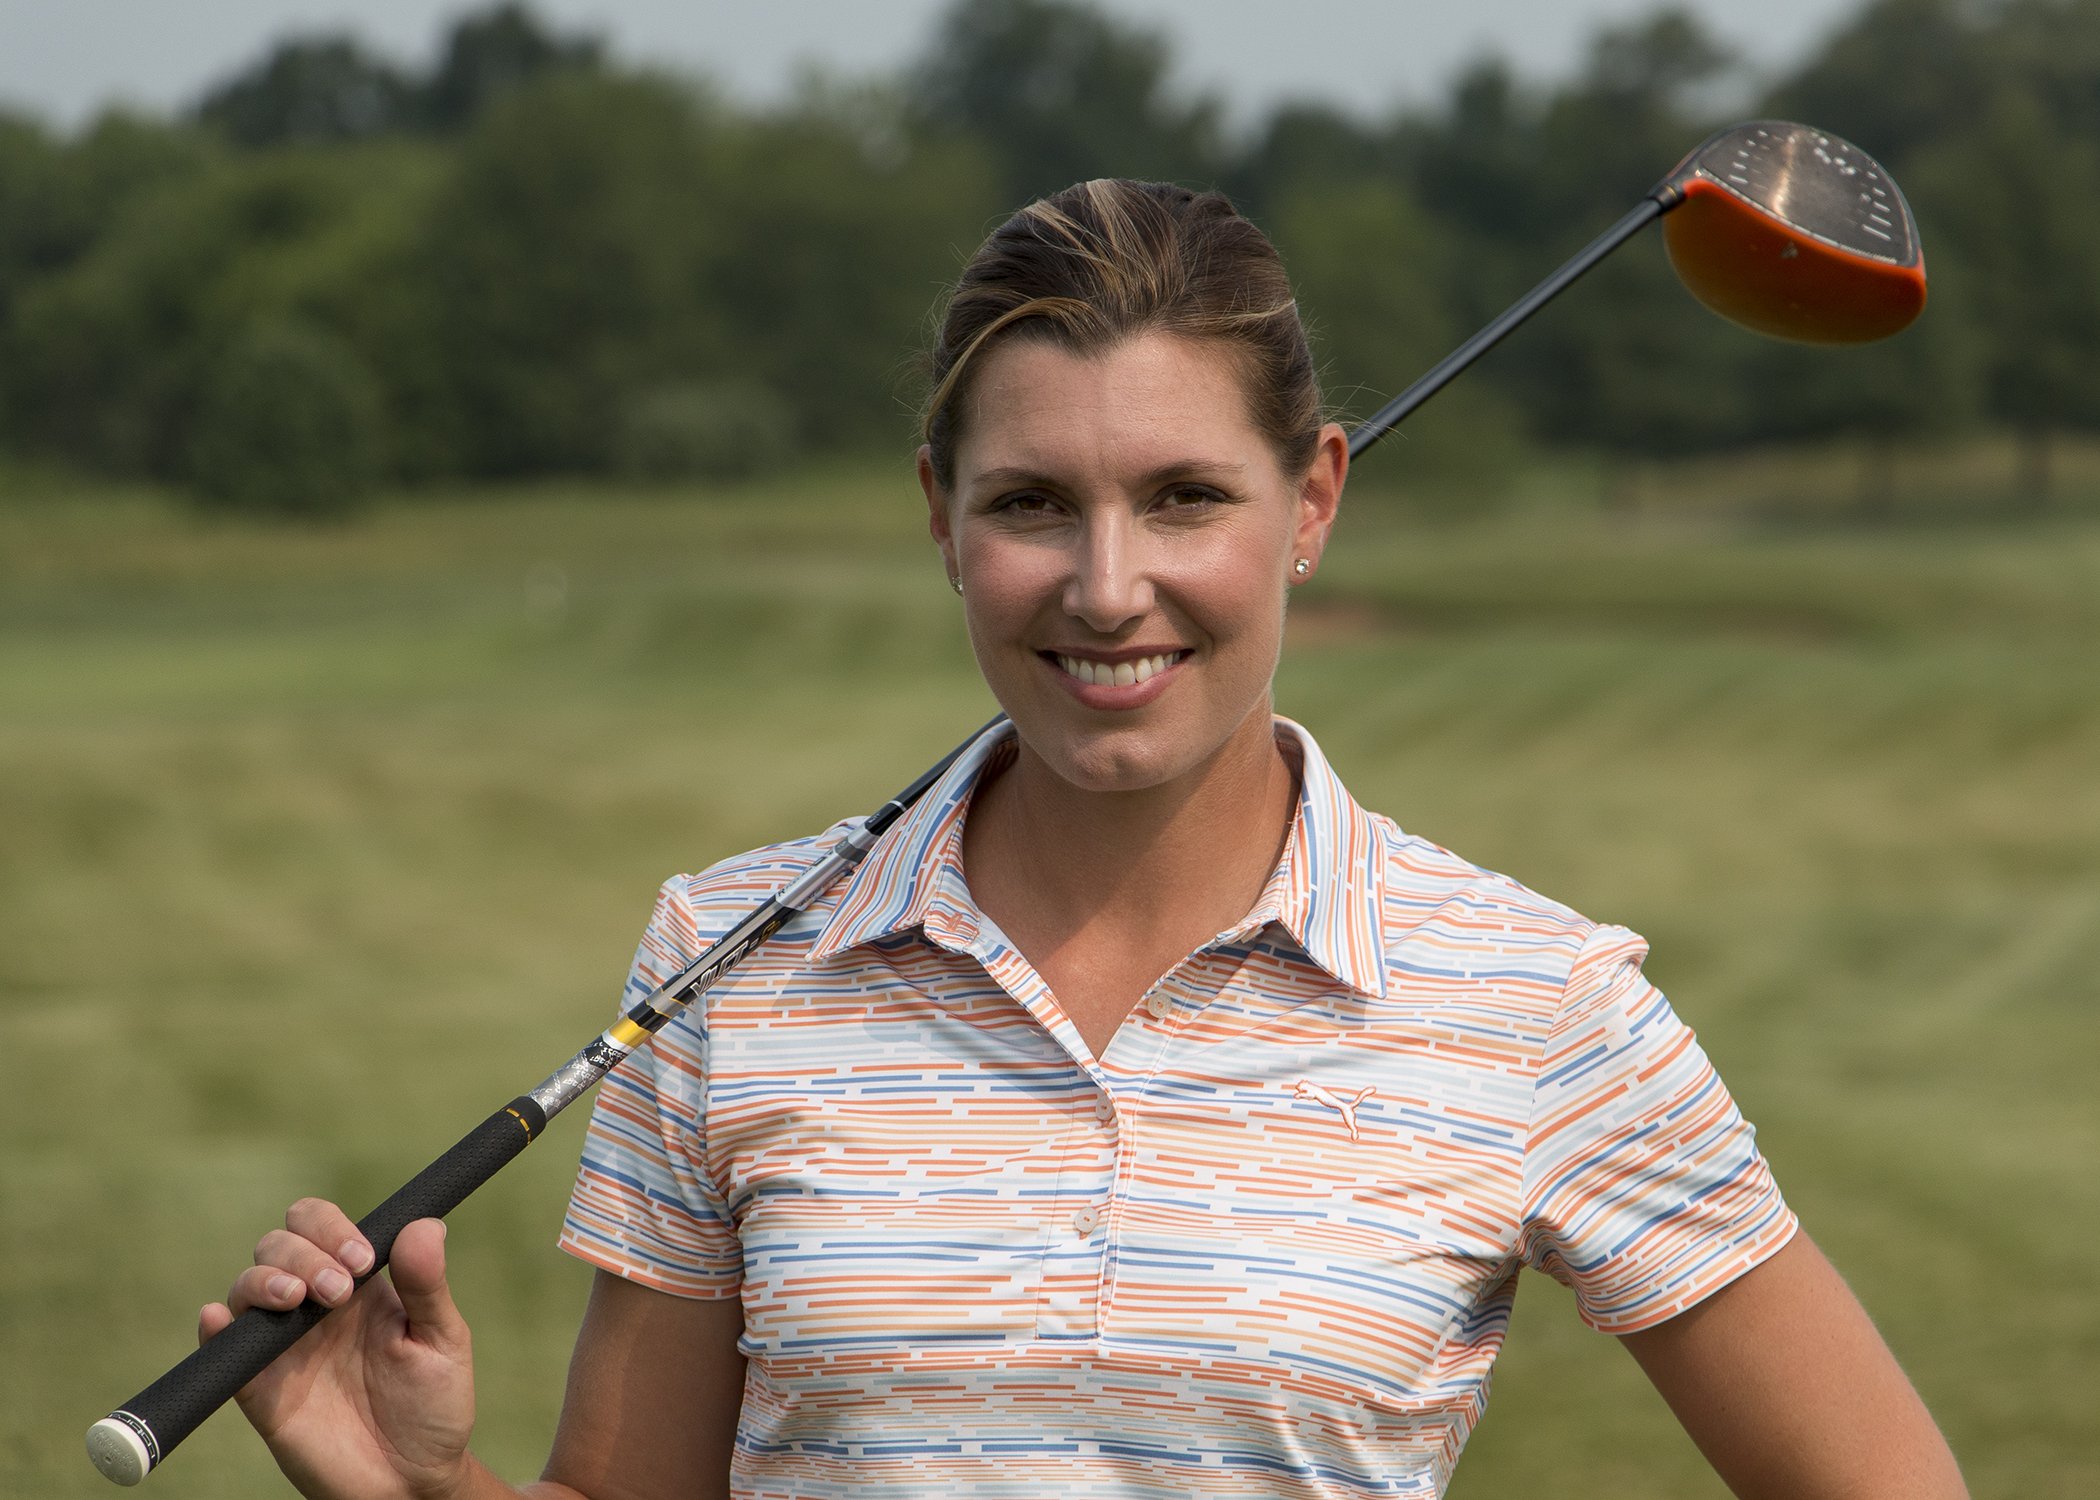 Erika Larkin is Director of Instruction at The Club at Creighton Farms.